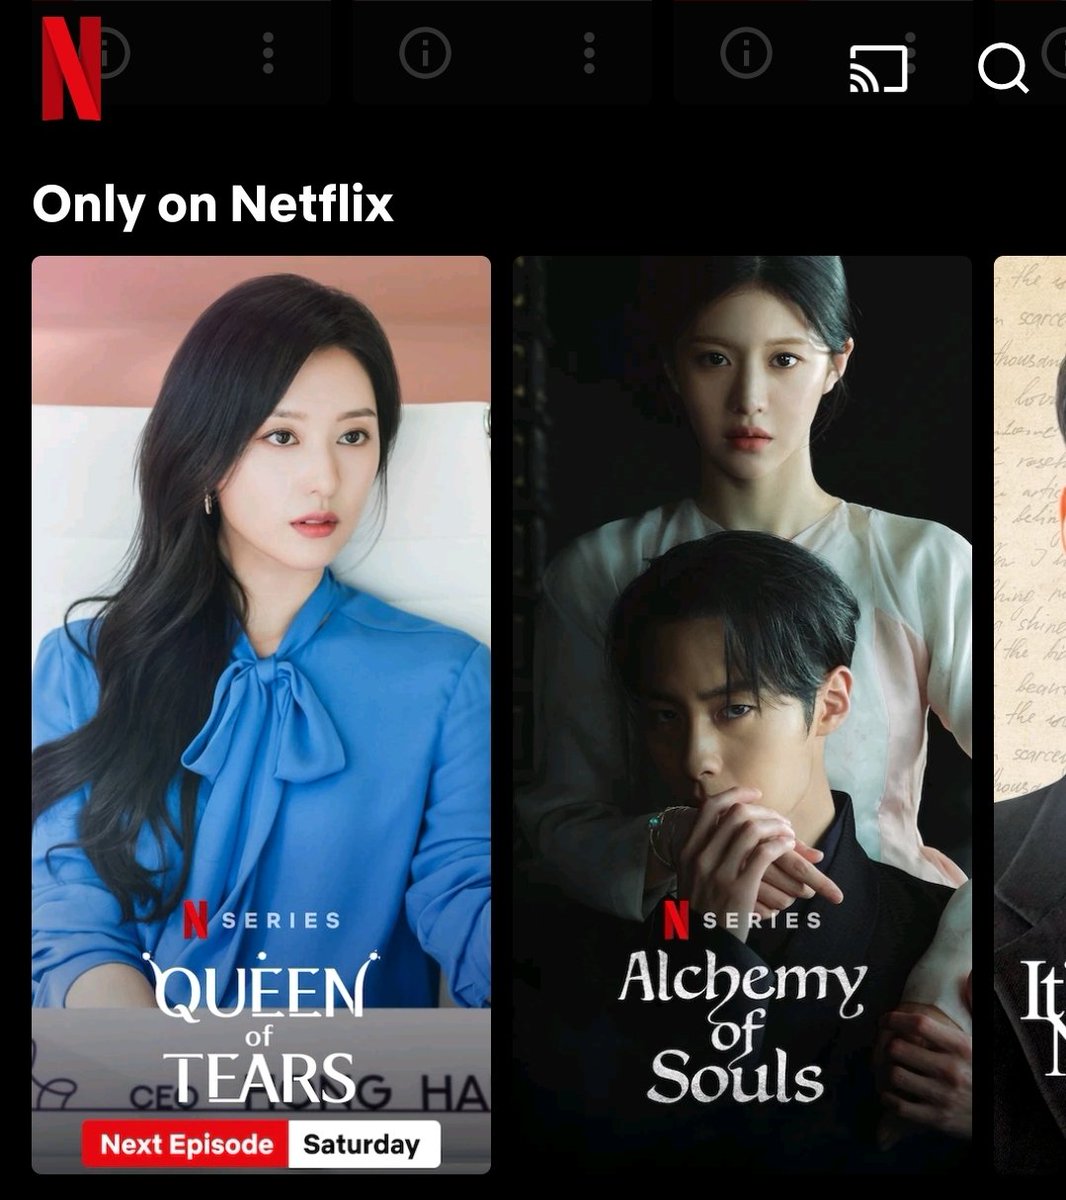 Both of them in one poster soon?
#KimJiwon #GoYounjung
#QueenOfTears #AlchemyOfSouls